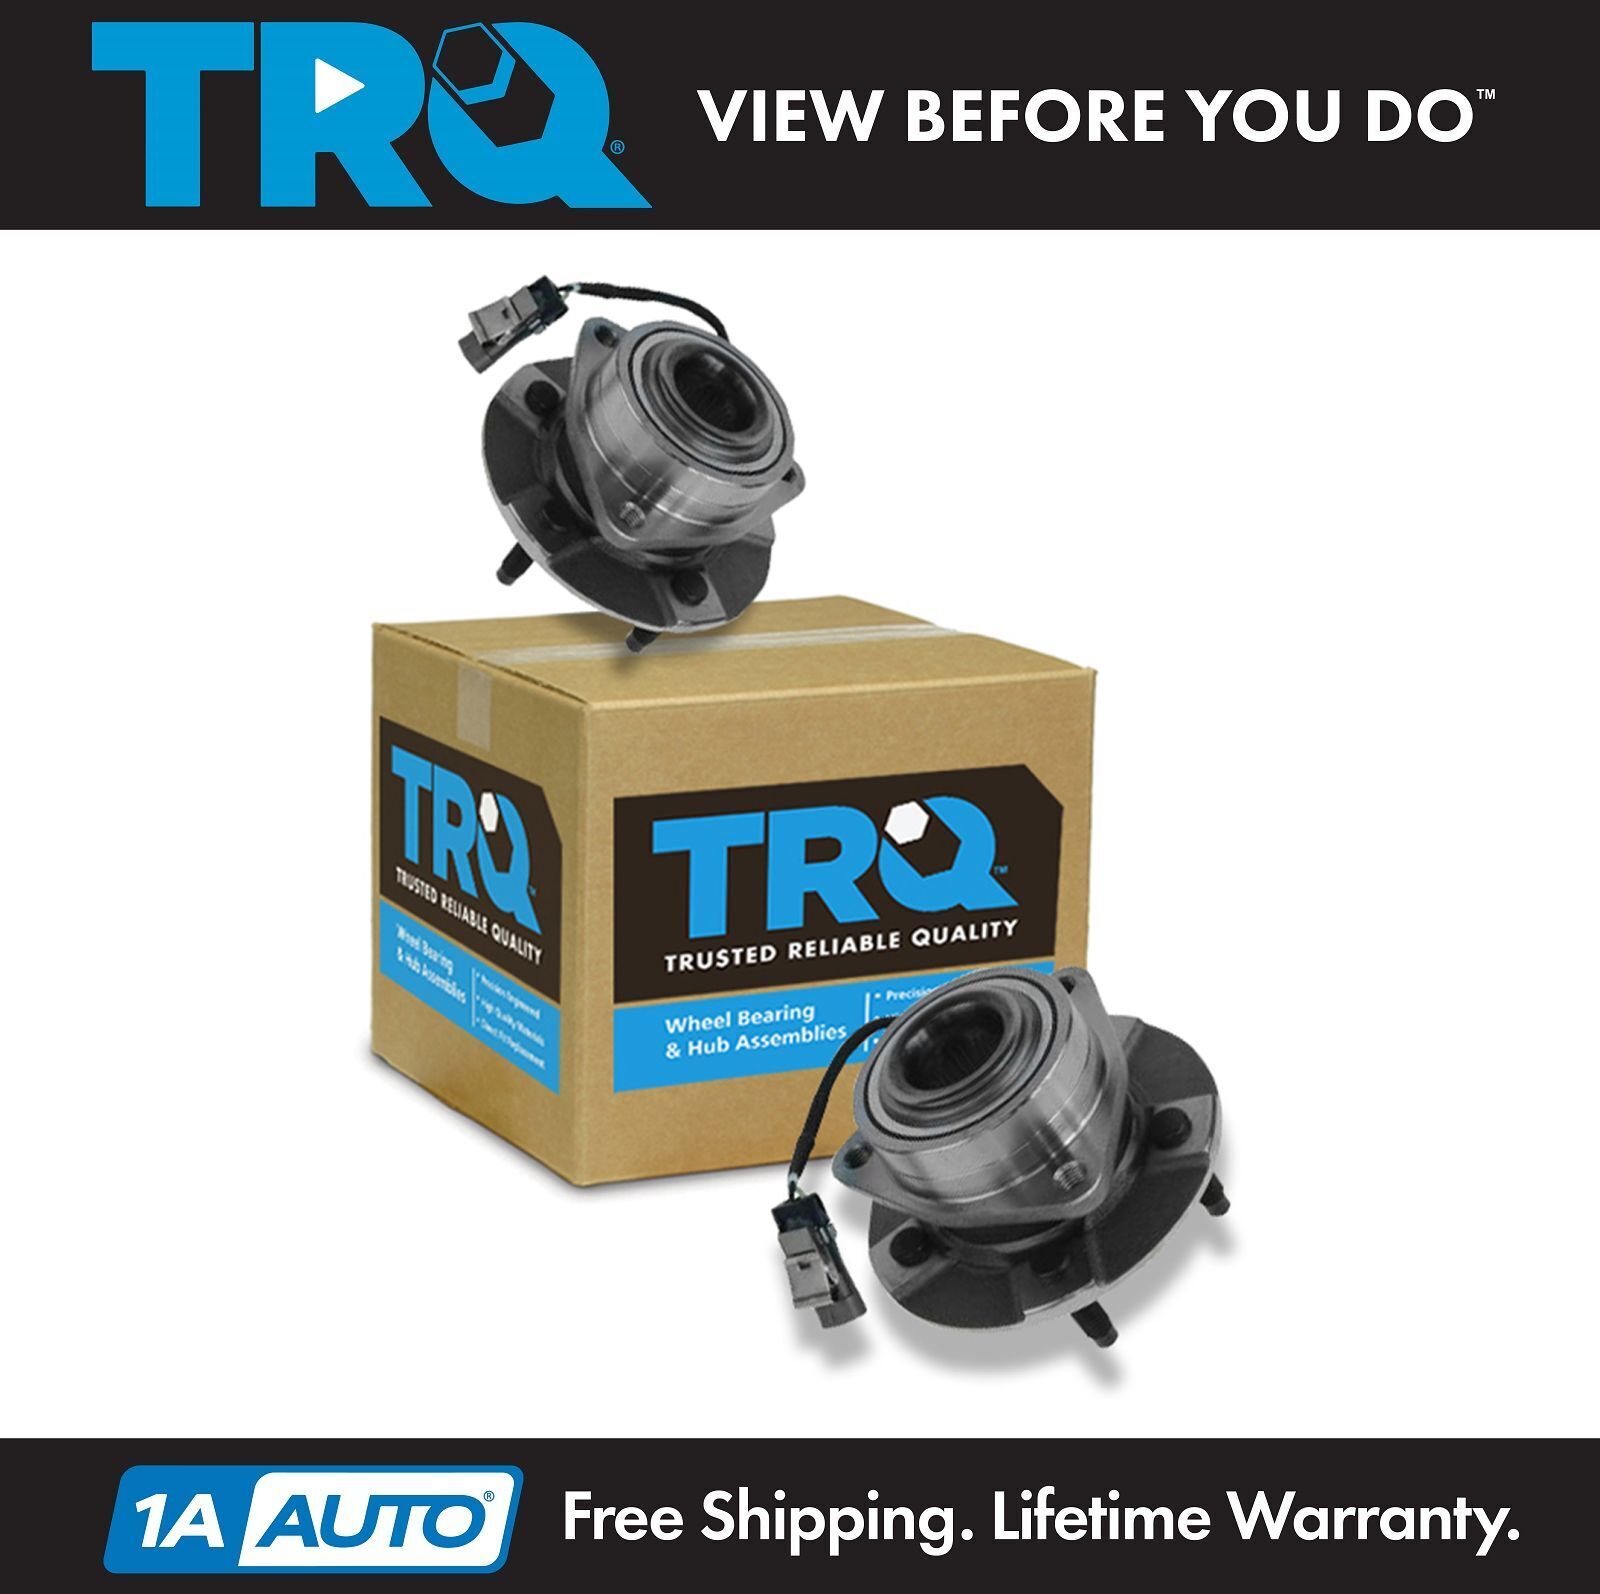 TRQ Front Wheel Hub & Bearing Assembly NEW Pair for Equinox Torrent Vue w/ ABS